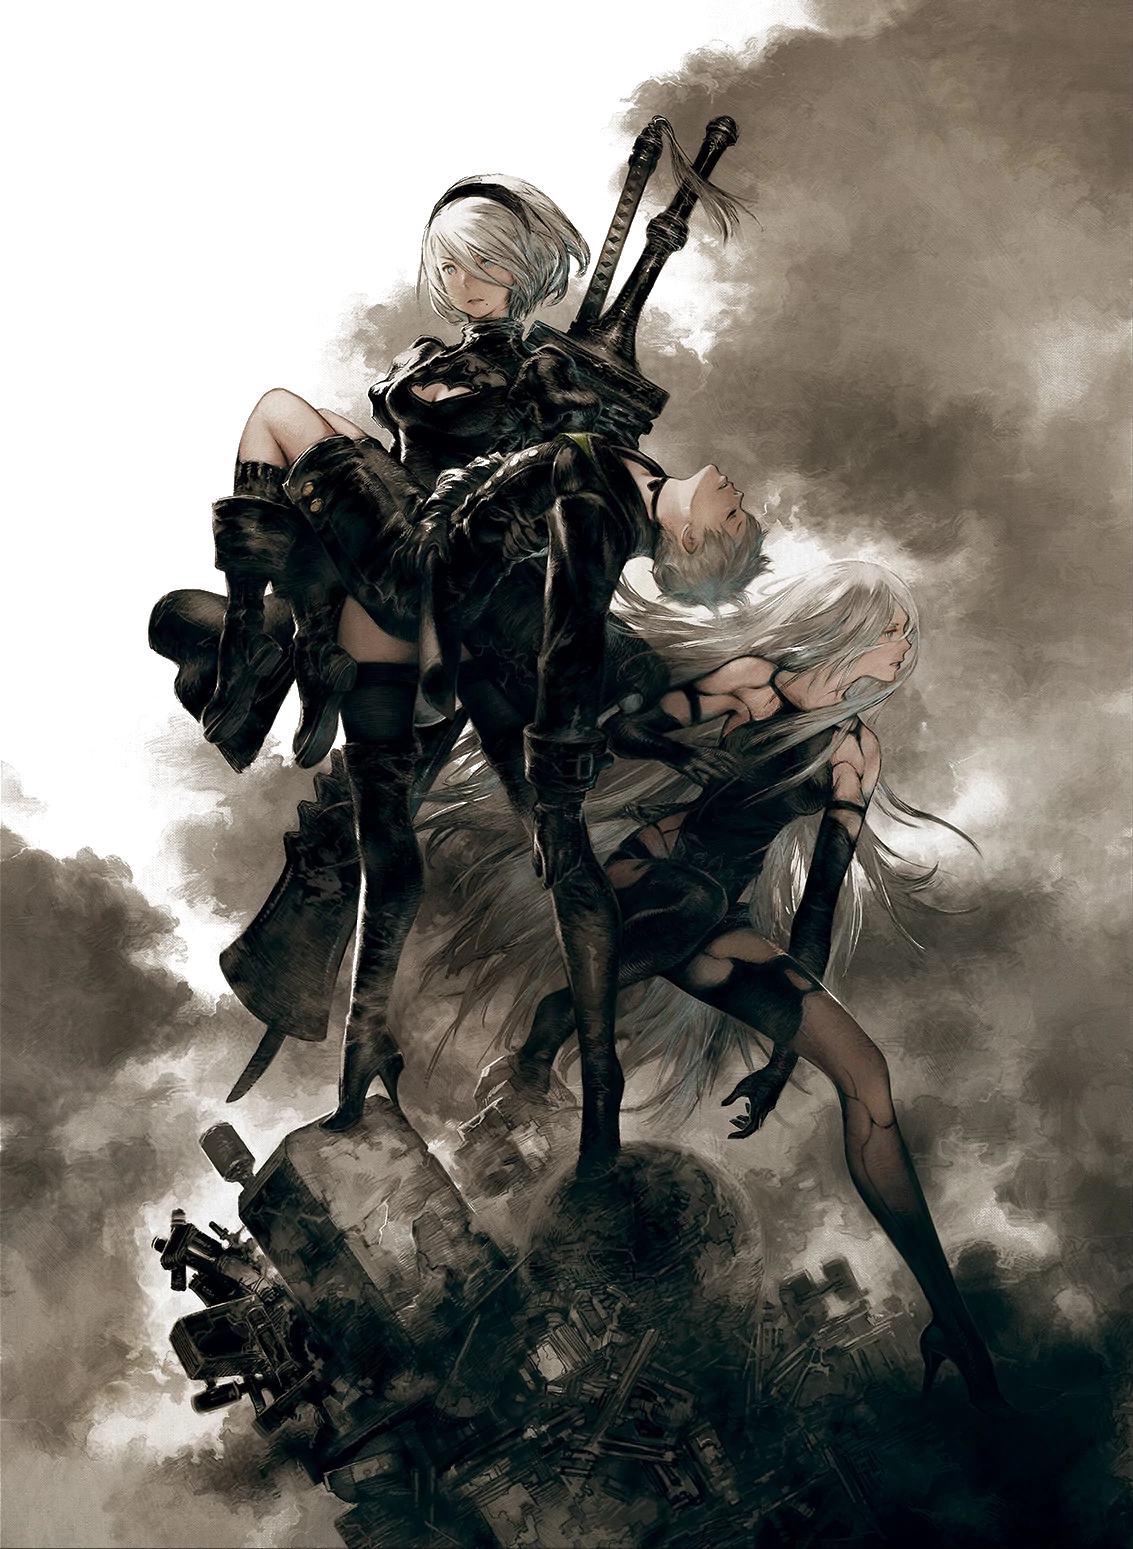 The protagonists of NieR Automata: 2B, A2 and 9S, as depicted on the cover of the Game of the YoRHa edition.